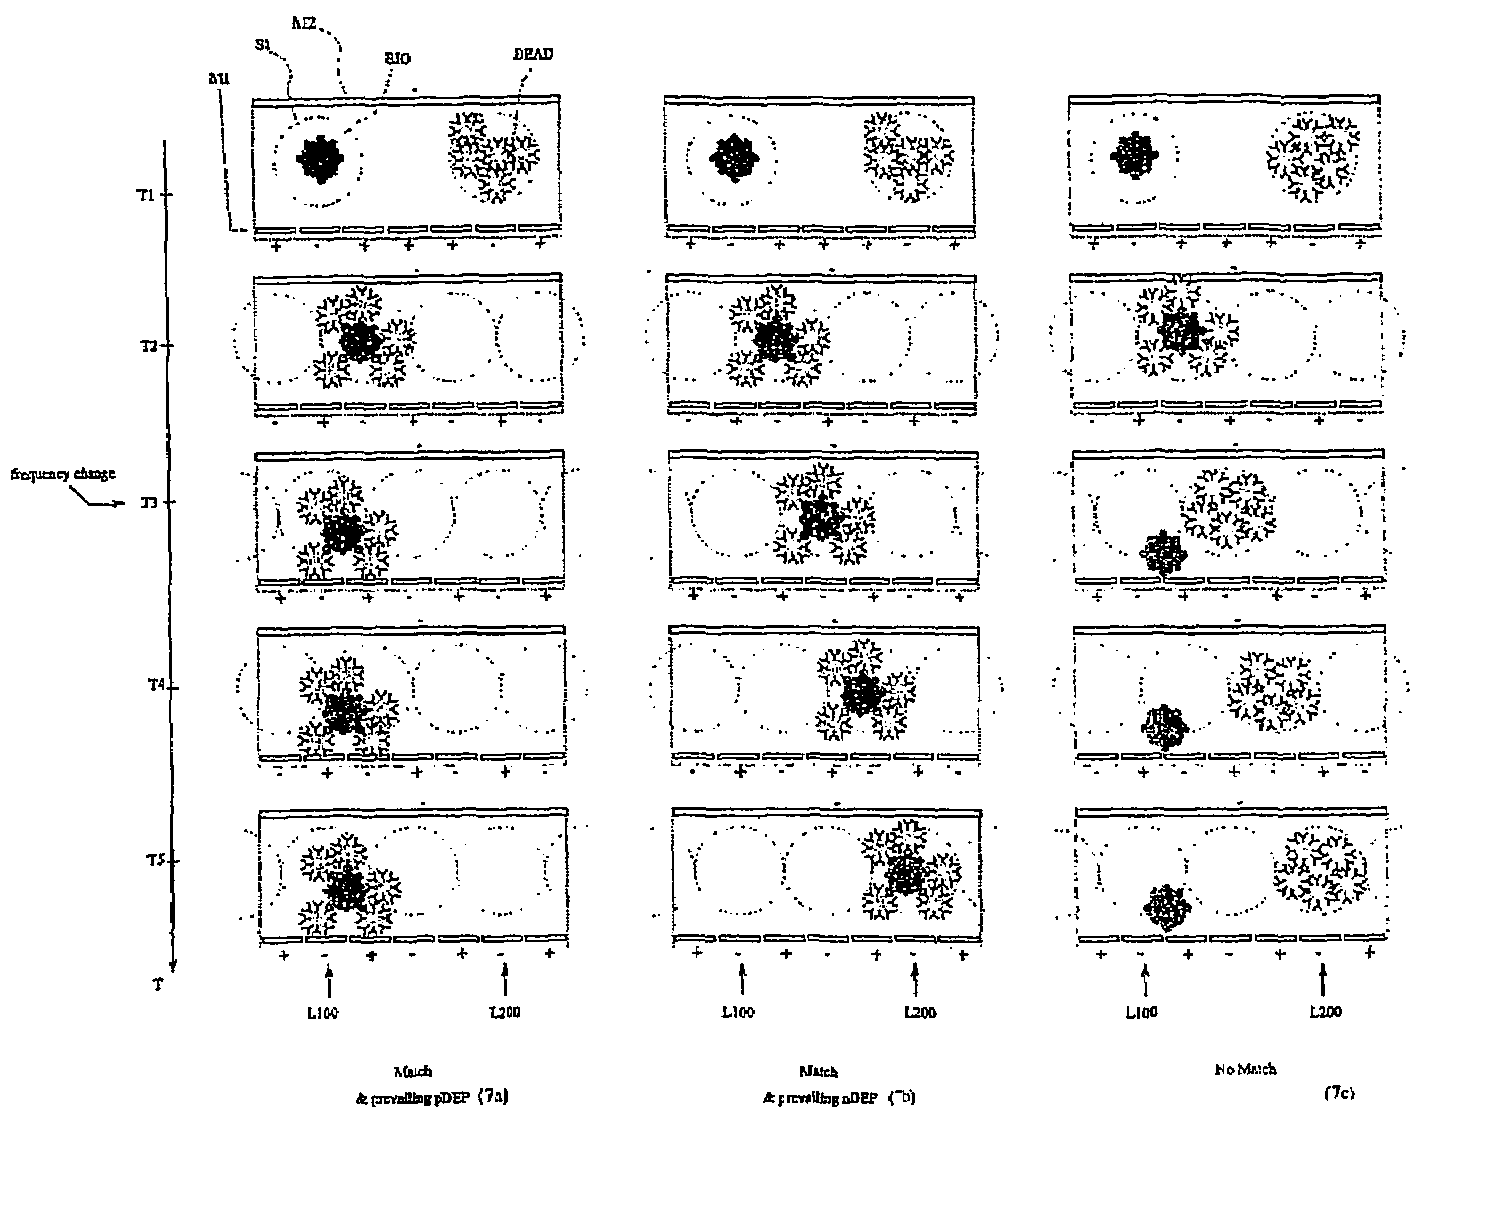 Method and apparatus for high-throughput biological-activity screening of cells and/or compounds